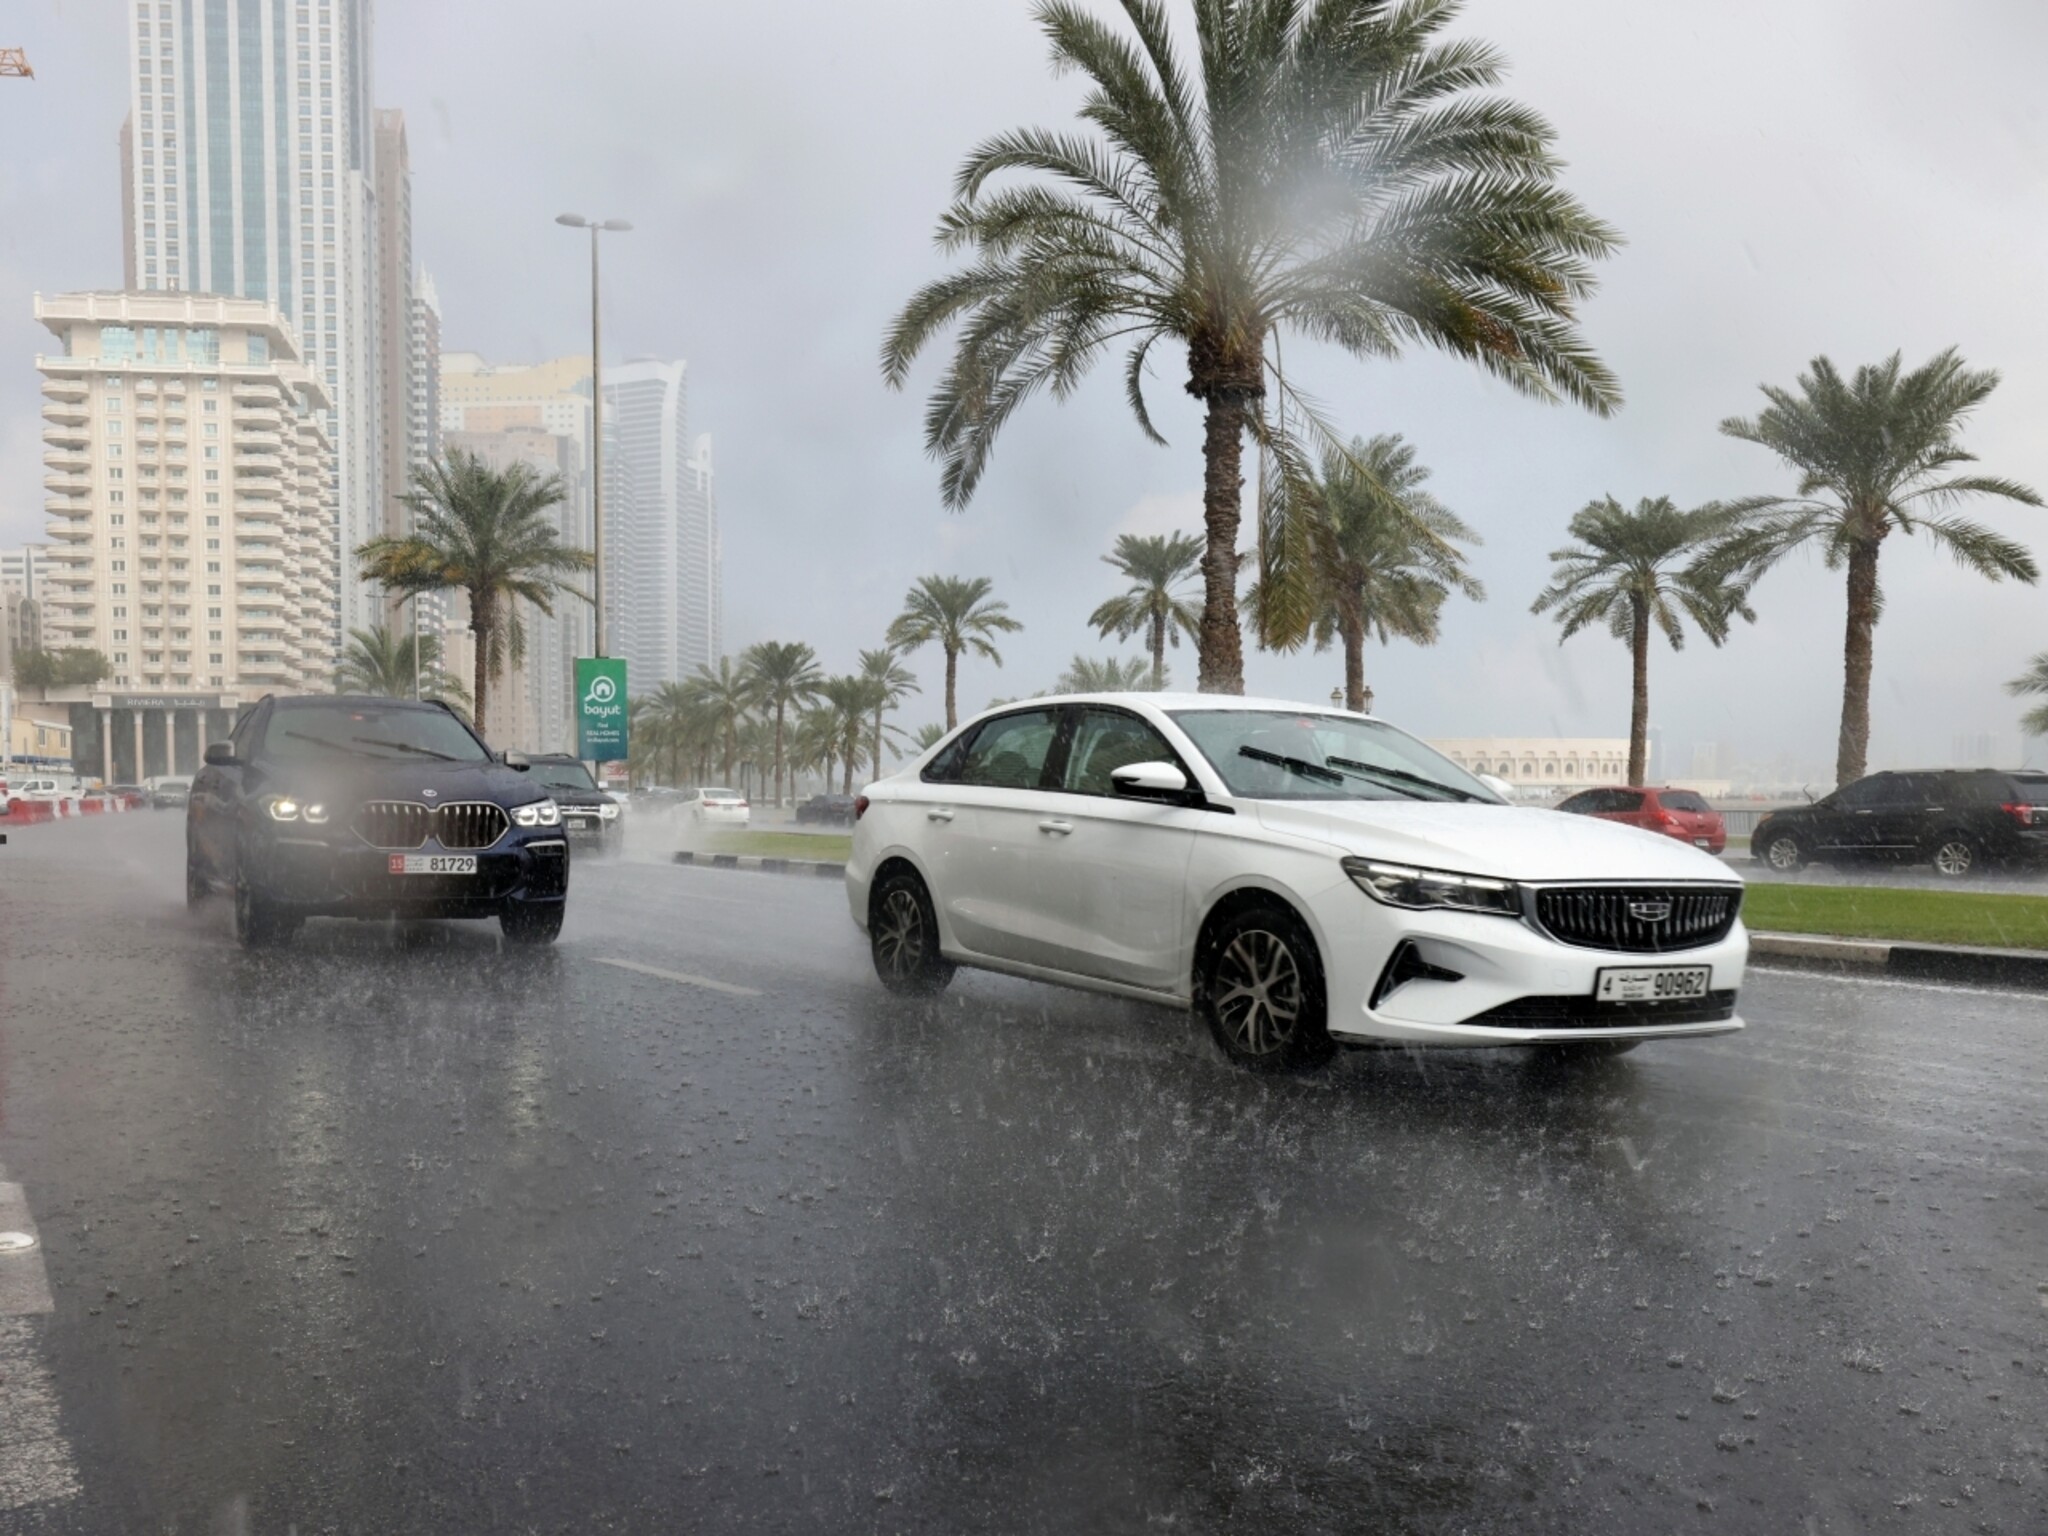 Meteorology issues red and yellow alerts due to fog and rainfall in the UAE